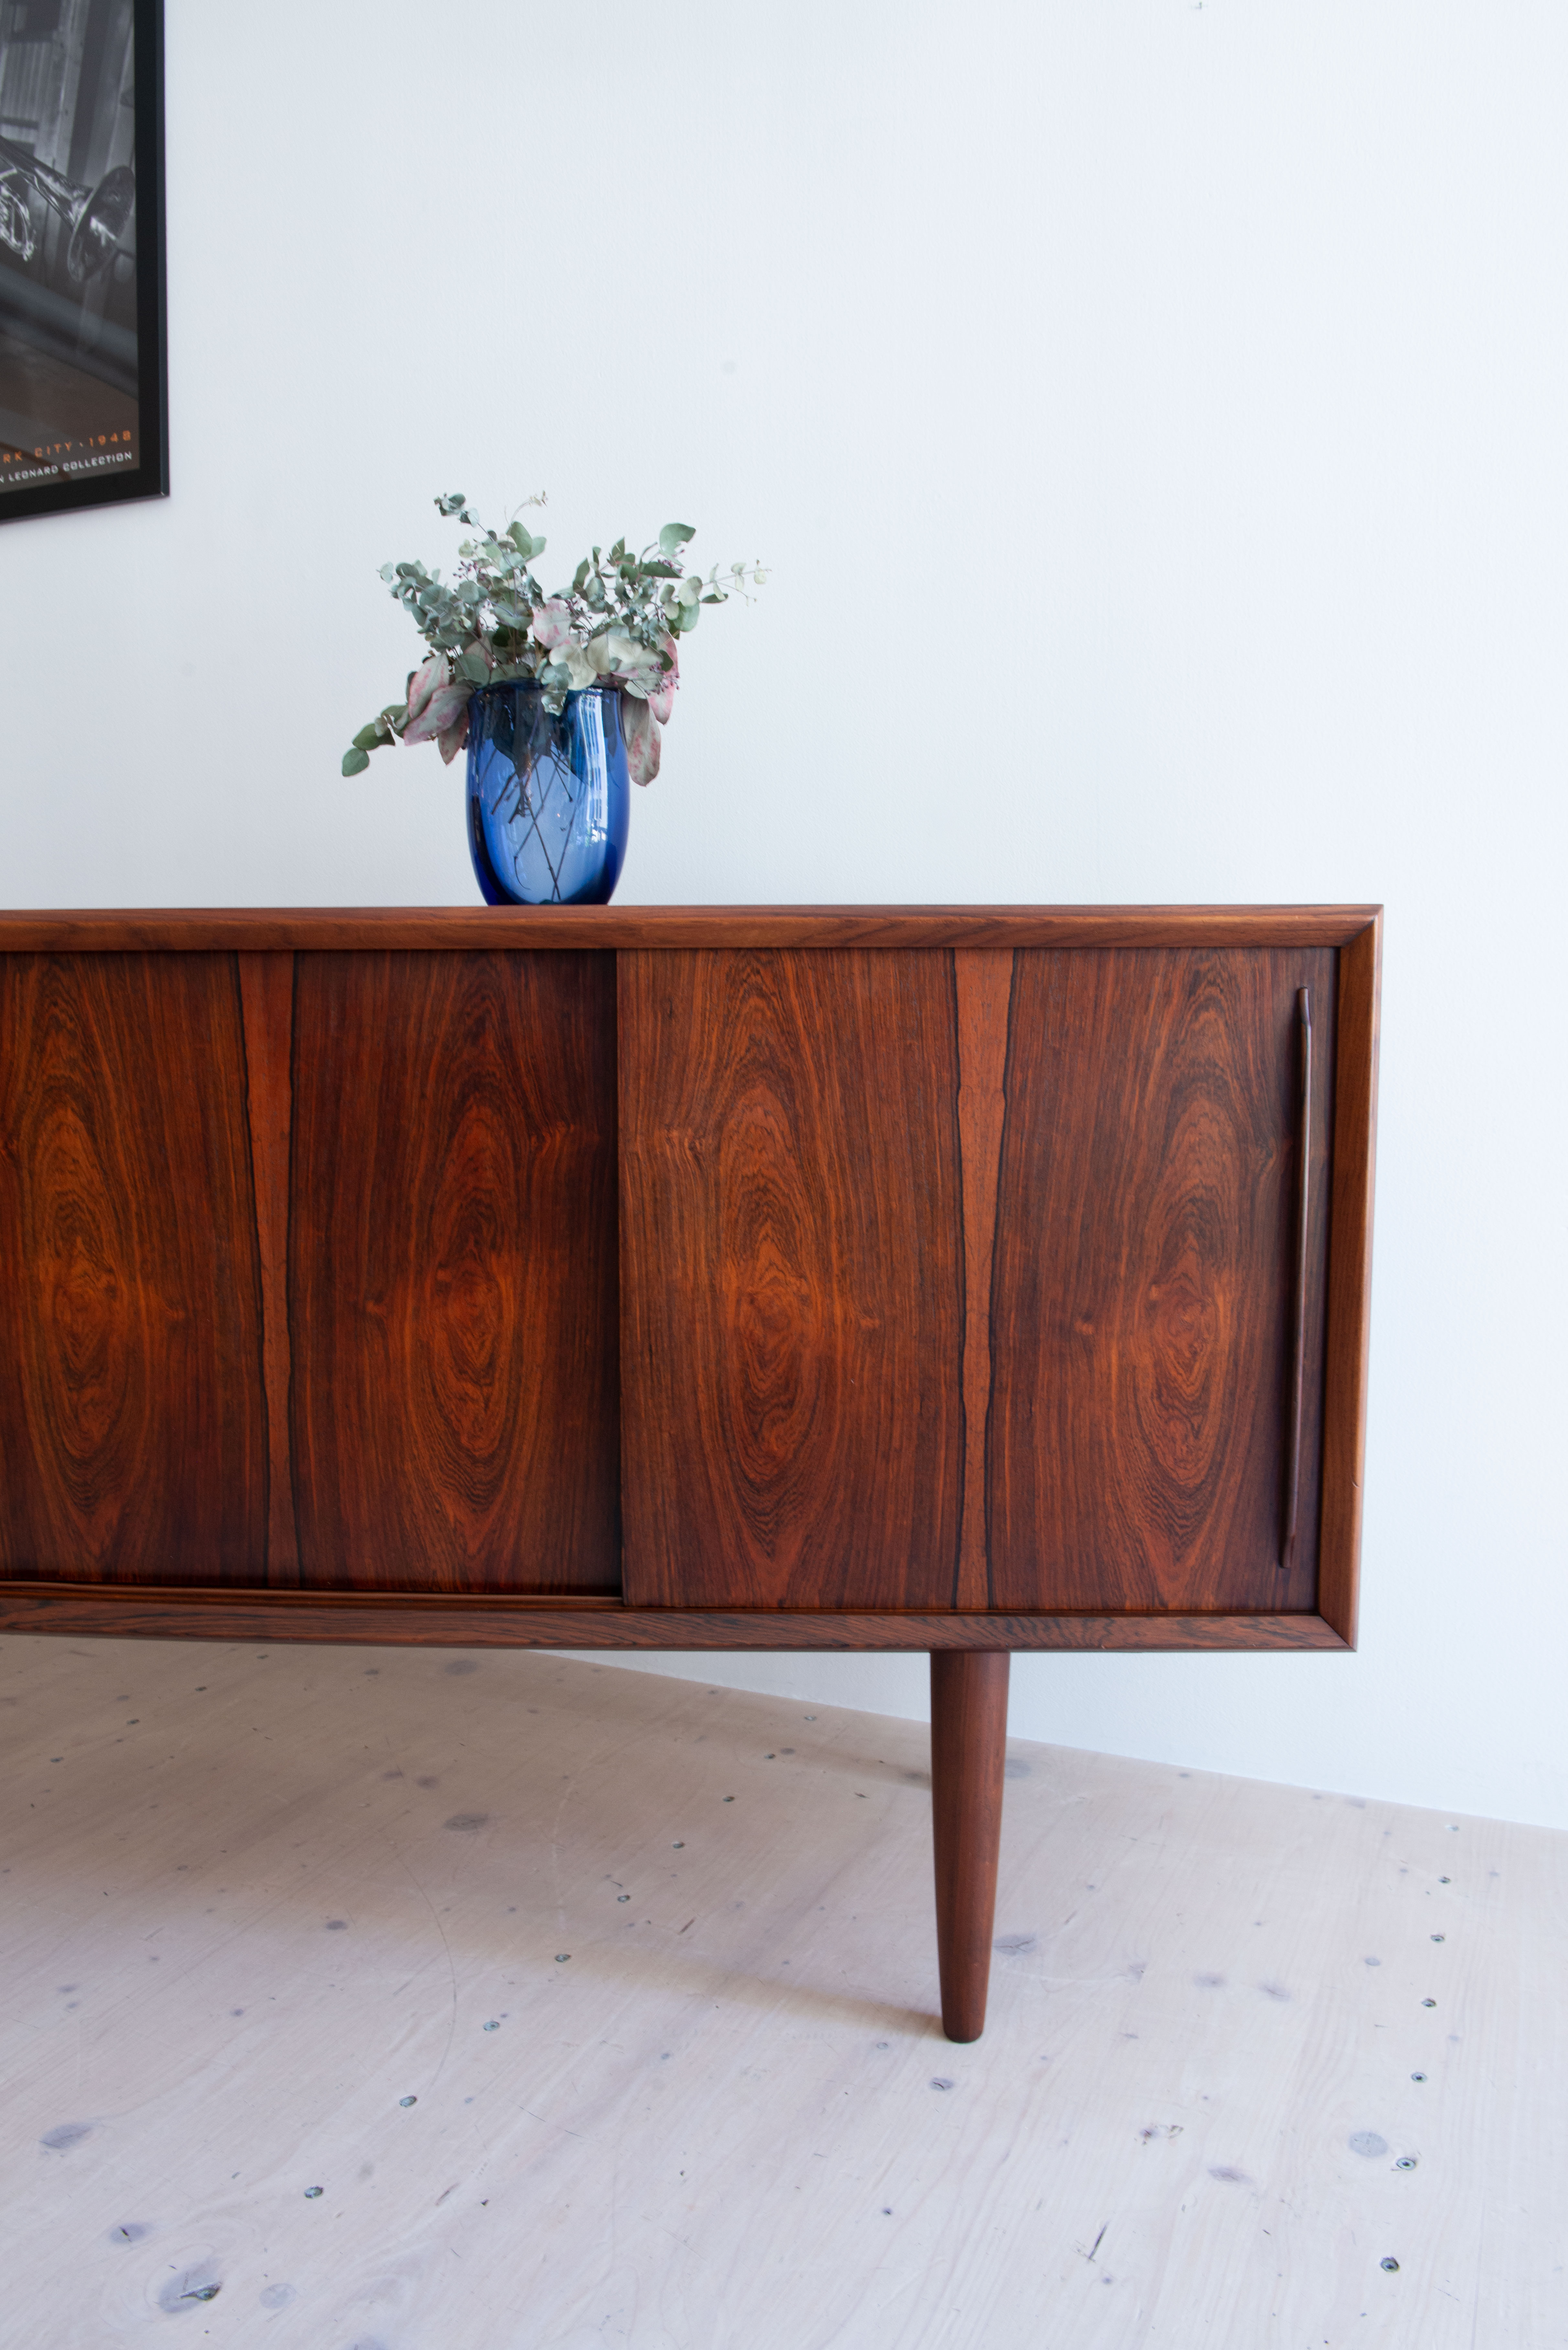 Rosewood Sideboard with Bowed Design. Designed by Svend Aage Madsen for HP Hansen. Made in Denmark, 1960s. Available at heyday möbel, Grubenstrasse 19, 8045 Zürich, Switzerland.